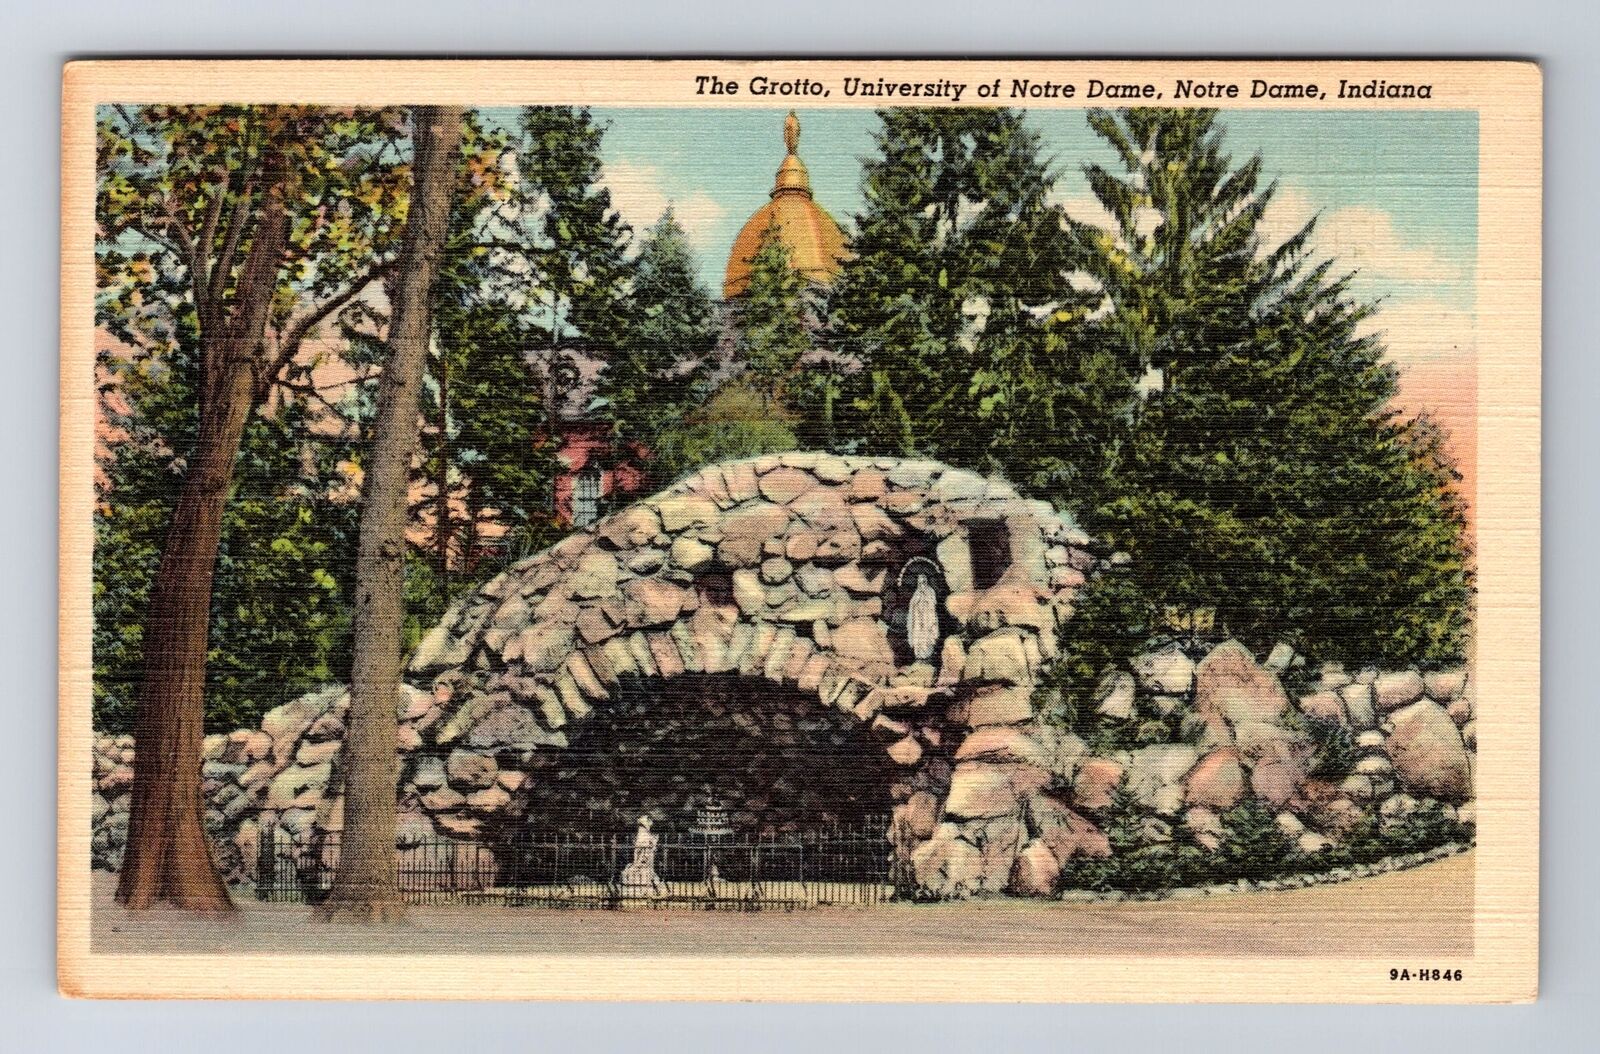 Notre Dame IN-Indiana, University of Notre Dame Grotto, Vintage History Postcard